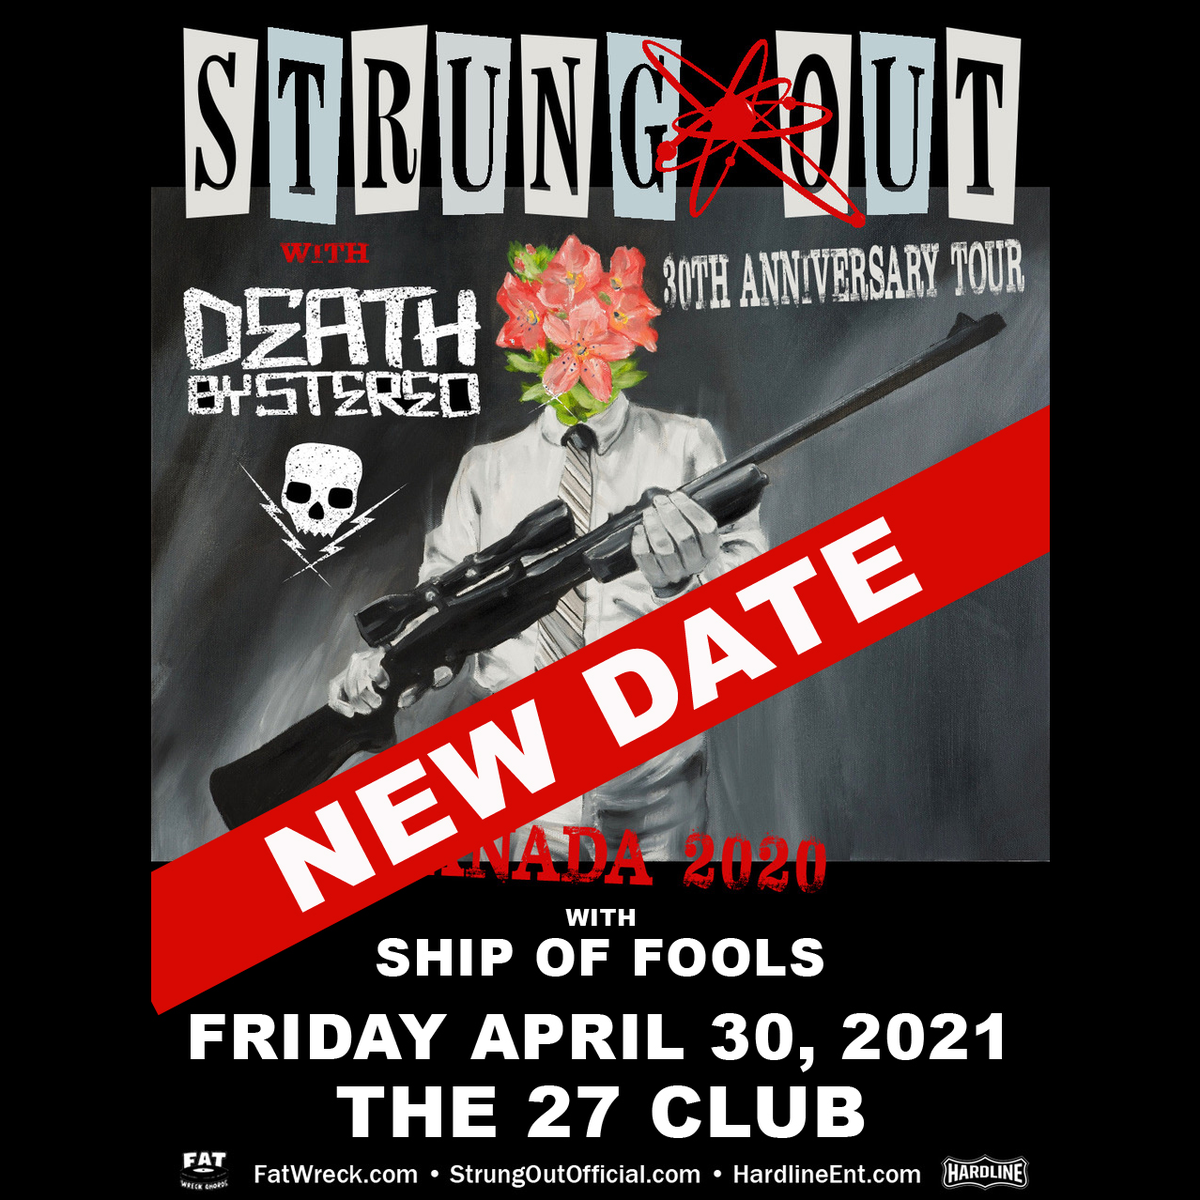 NEW DATE ANNOUNCED - The Strung Out show has been pushed back to Fri April 30, 2021 with Death By Stereo & Ship of Fools - check the event below for more info. Stay safe & self isolate! facebook.com/events/1368285…